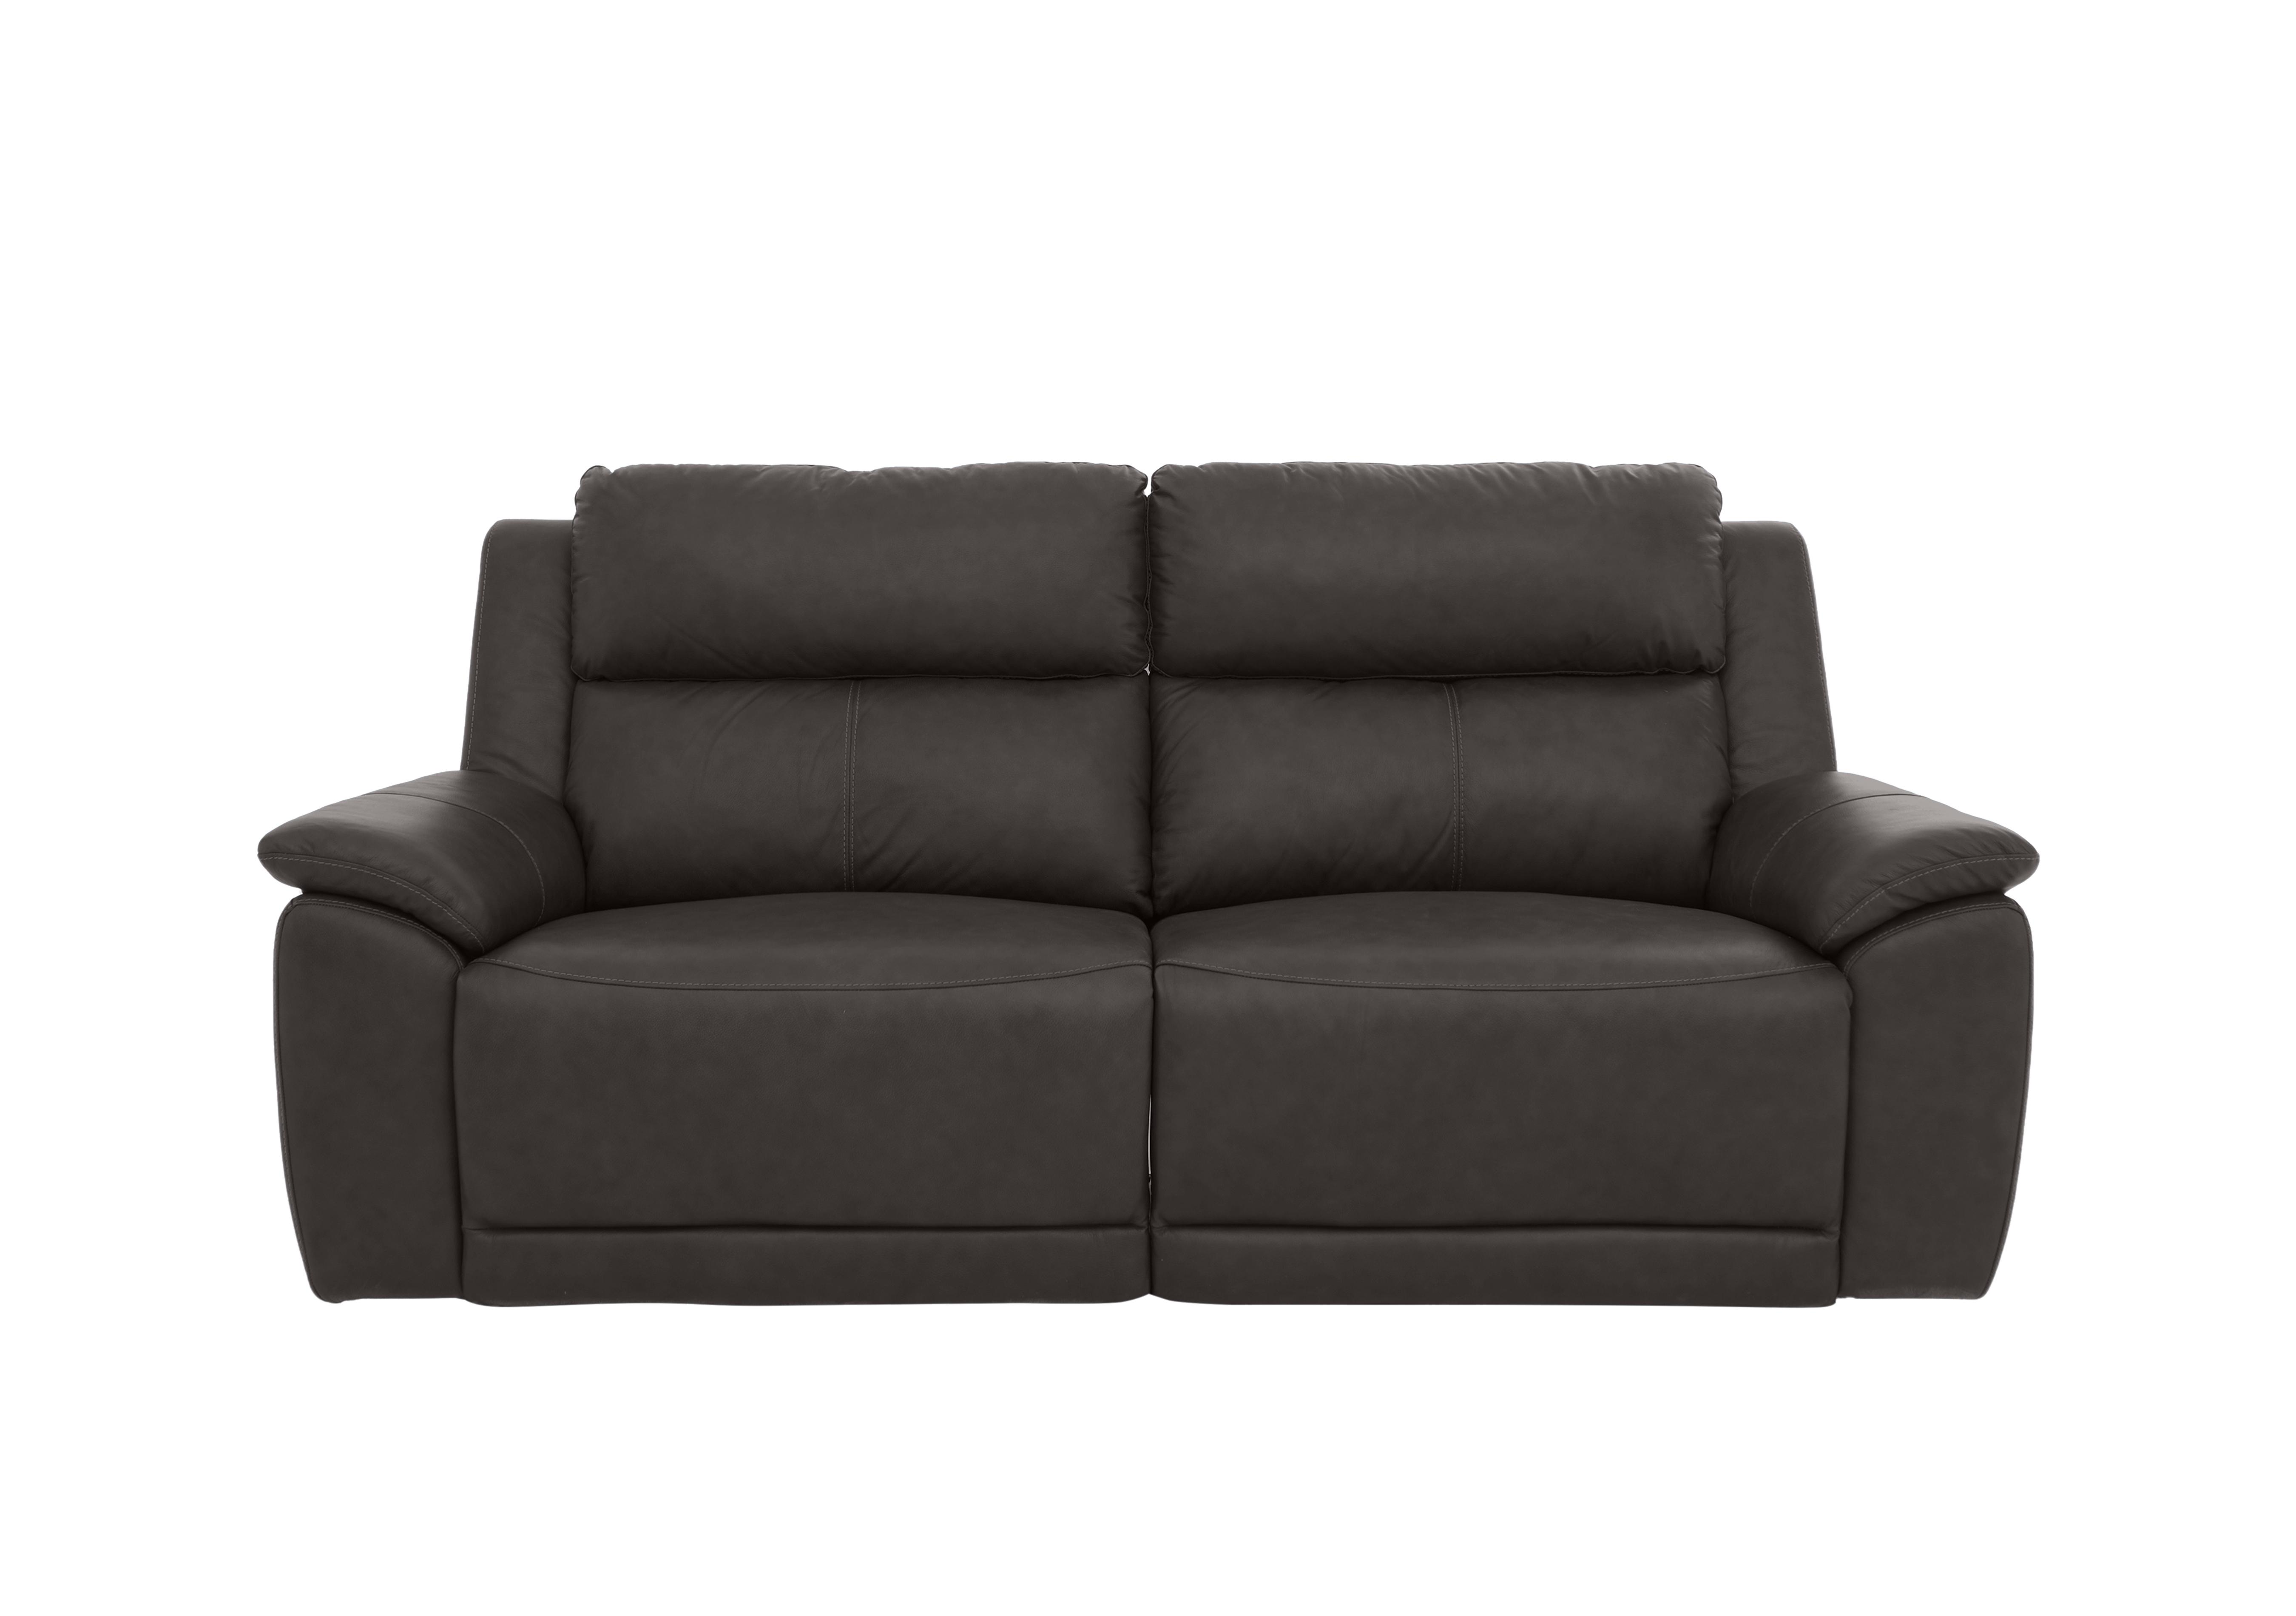 Utah 3 Seater Leather Power Recliner Sofa with Power Headrests and Power Lumbar in Piompo Lx-6404 on Furniture Village